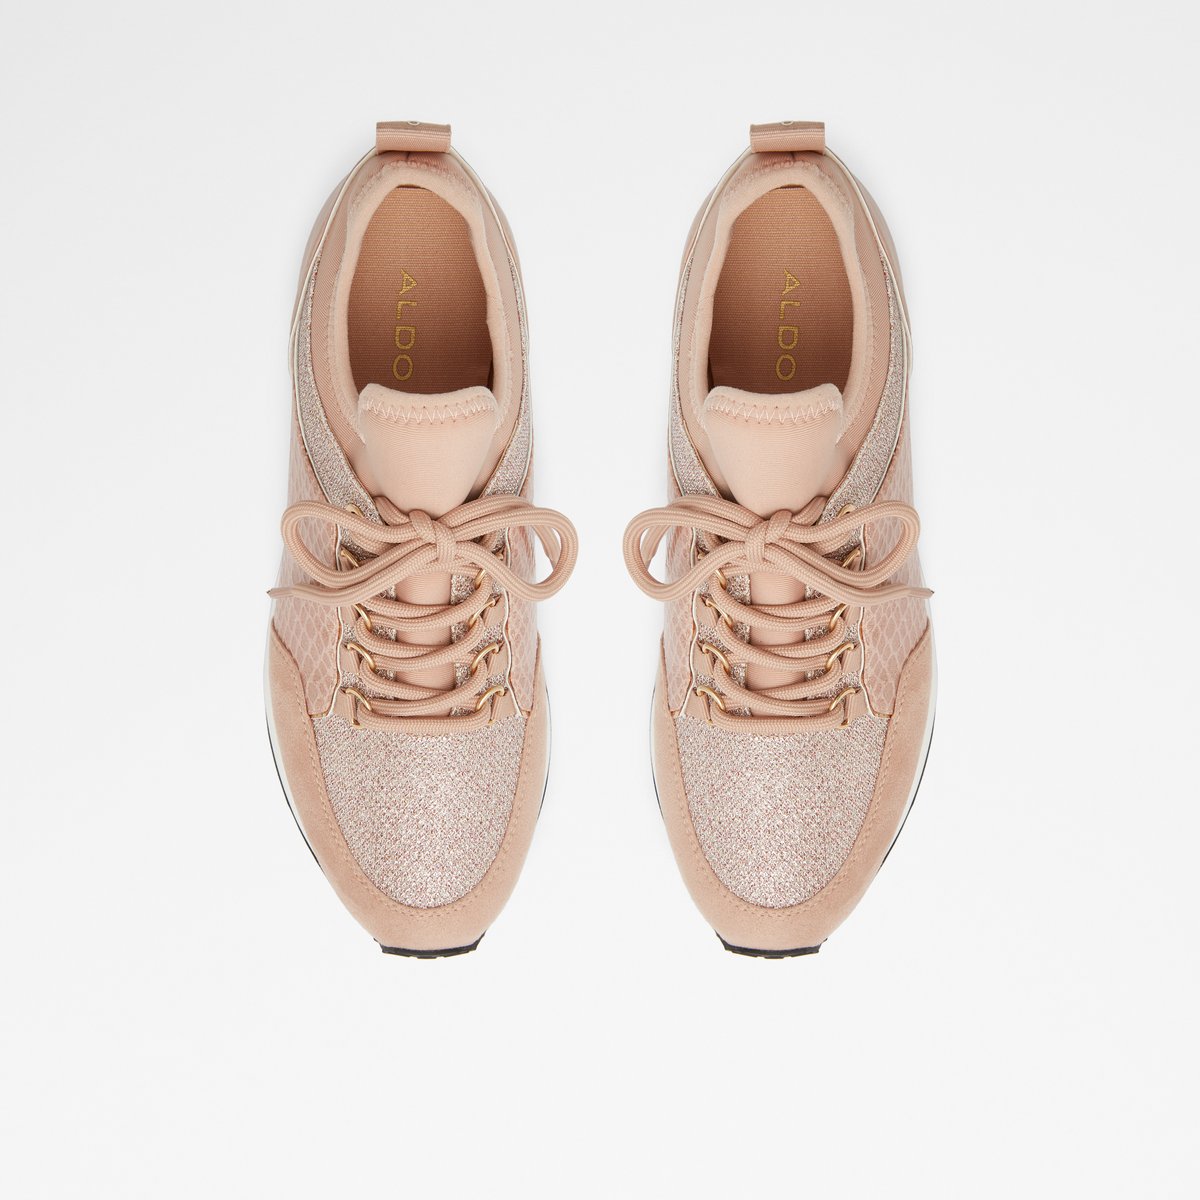 Courtwood Rose Gold Women's Platform and Wedge Sneakers | ALDO Canada